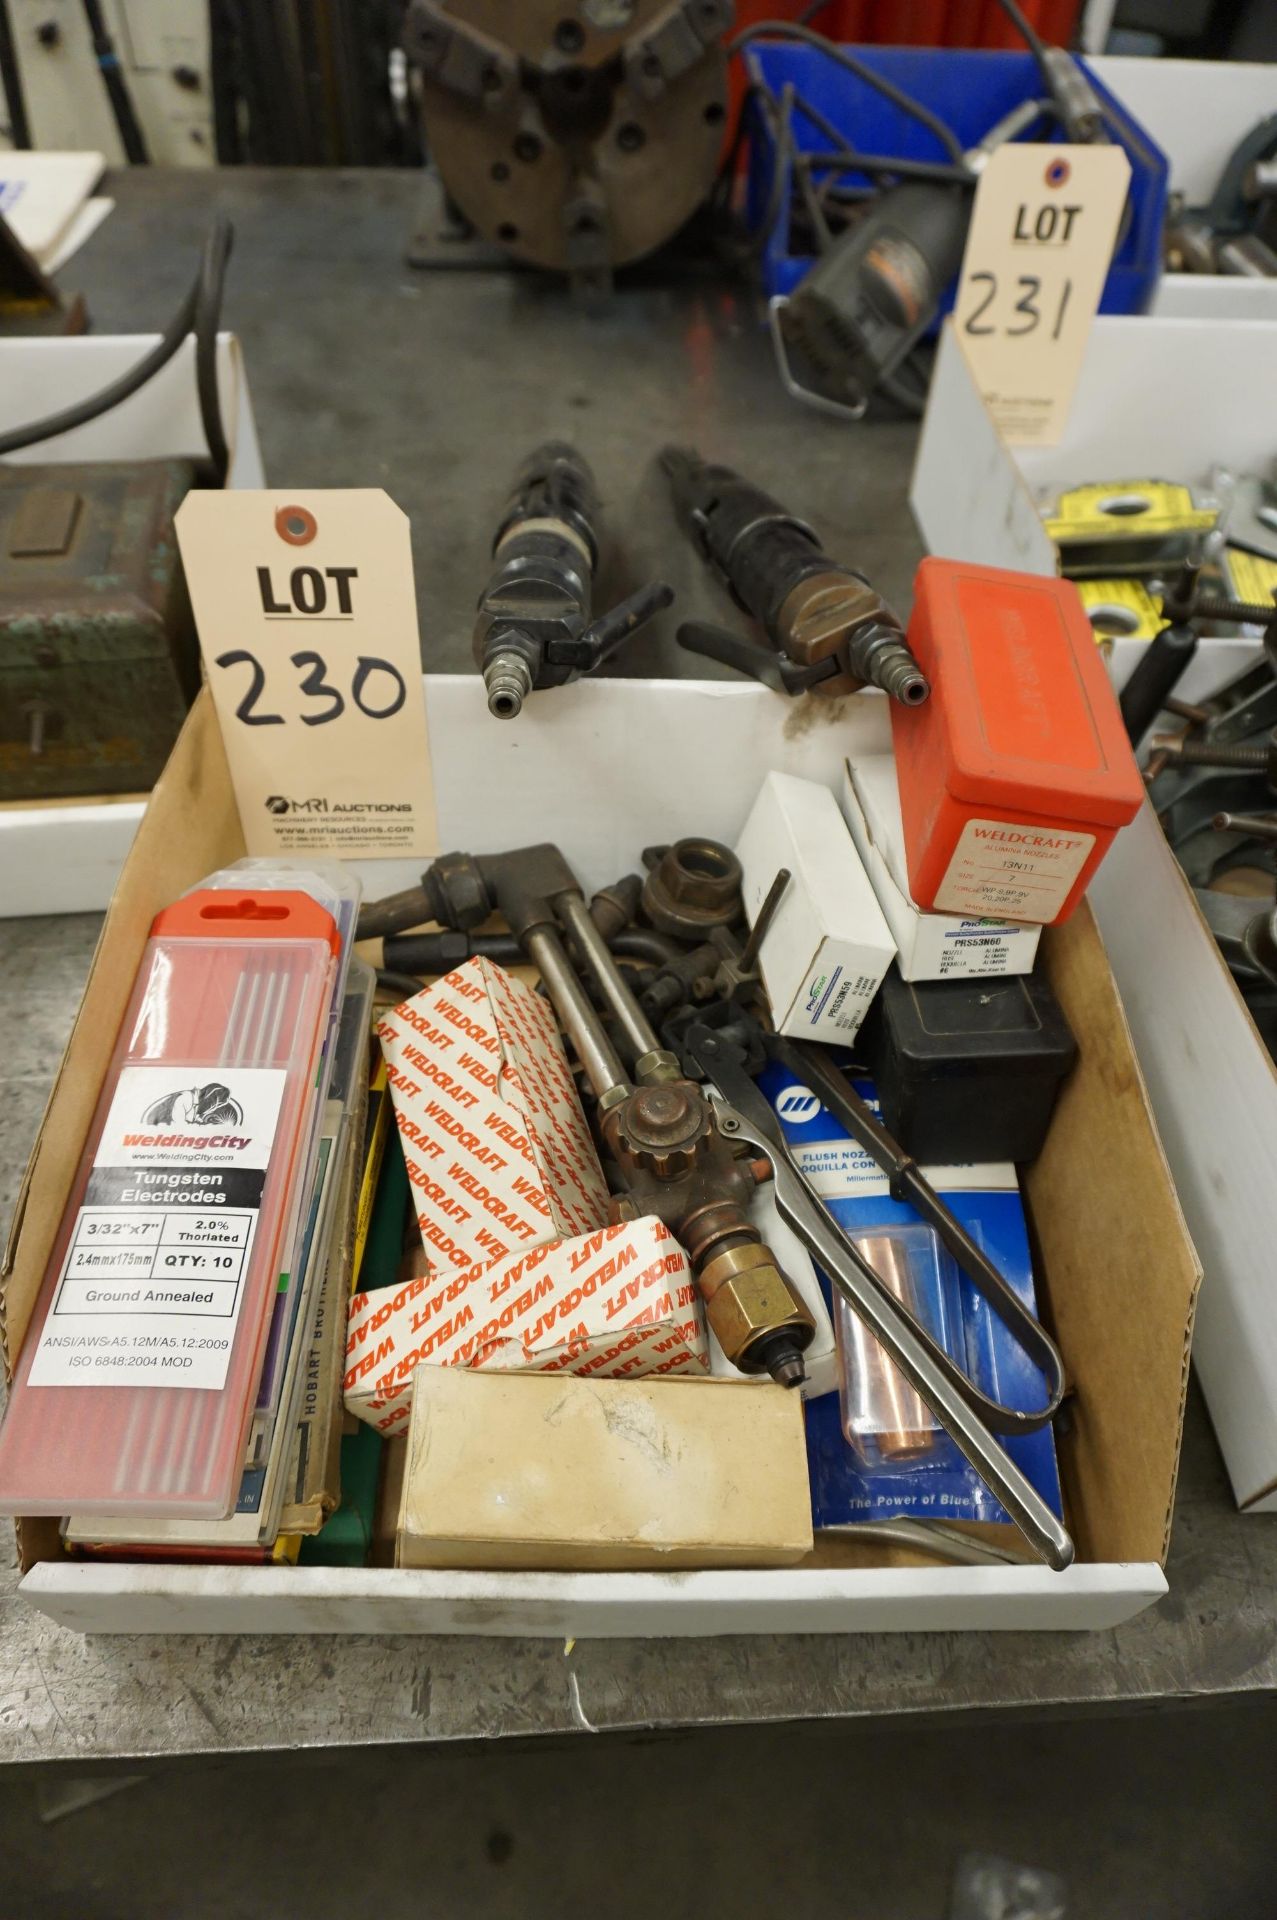 MISC. (2) PNEUMATIC NEEDLE SCALERS, WELDING GUNS, ELECTRODES, AND NOZZLES